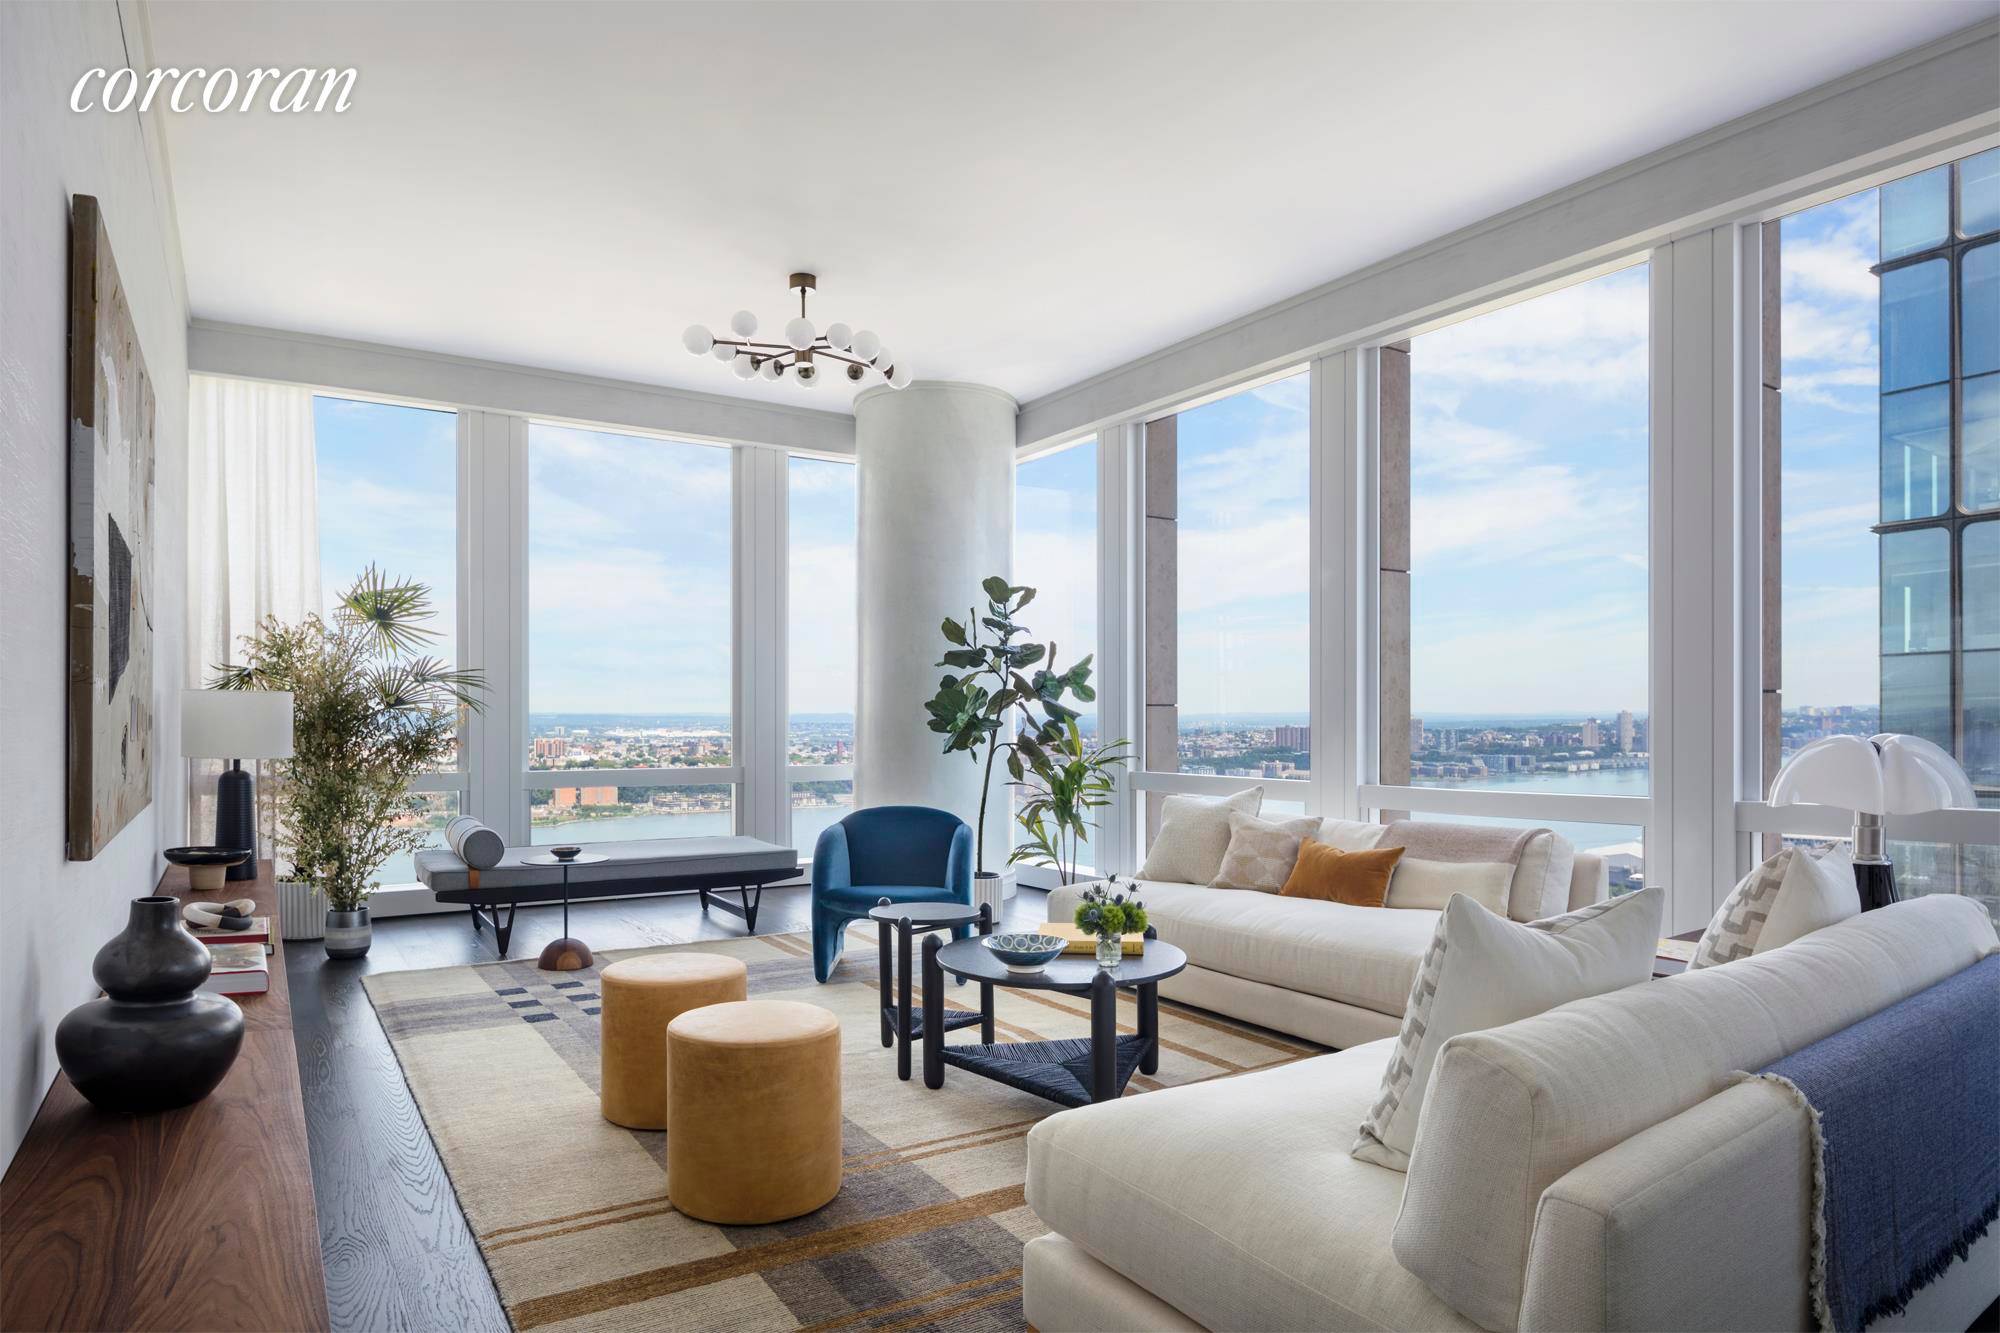 EXPERIENCE SPECTACULAR VIEWS OF THE HUDSON RIVER FROM THIS GRACIOUS CORNER TWO BEDROOM HOME.